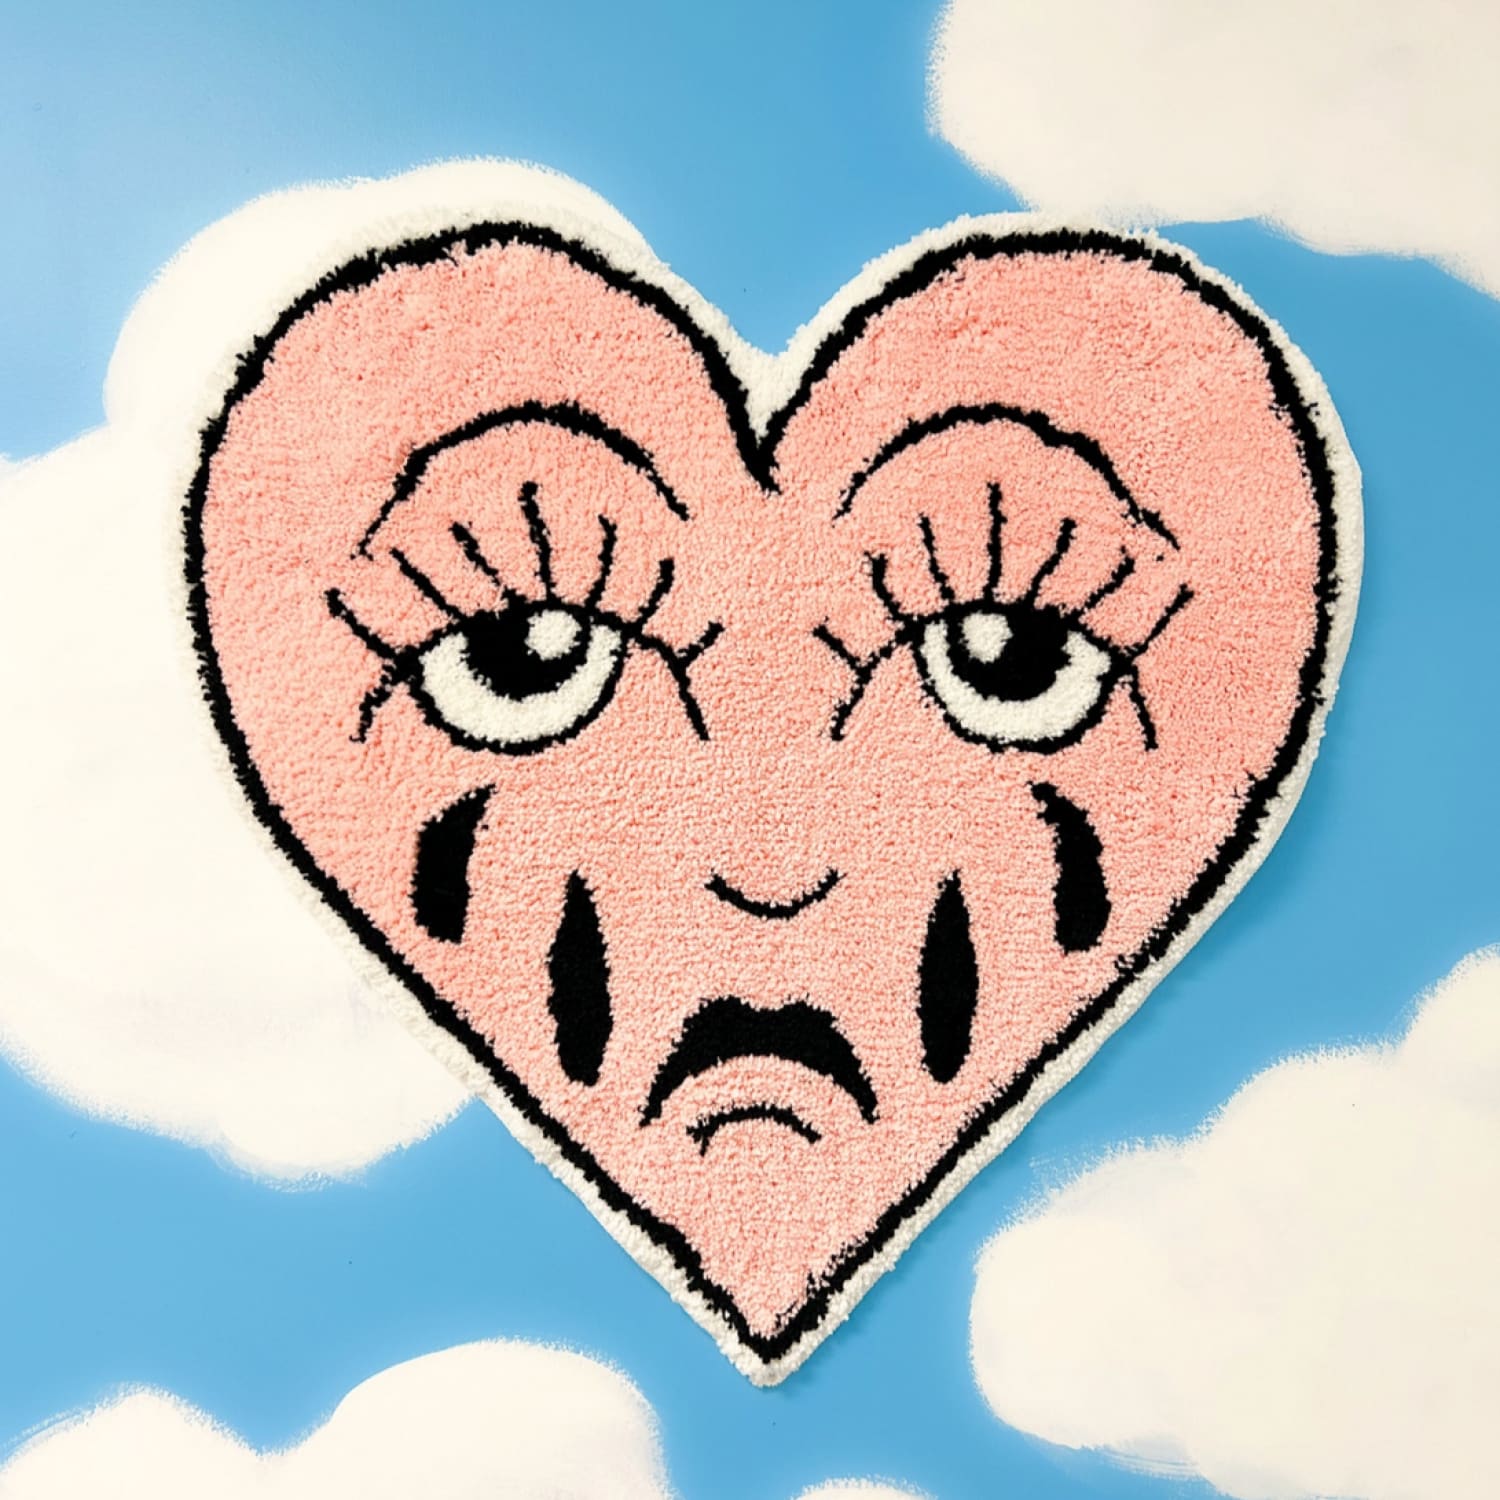 Crying Heart Rug Accent - Bad Bitch Home Decor Kitsch